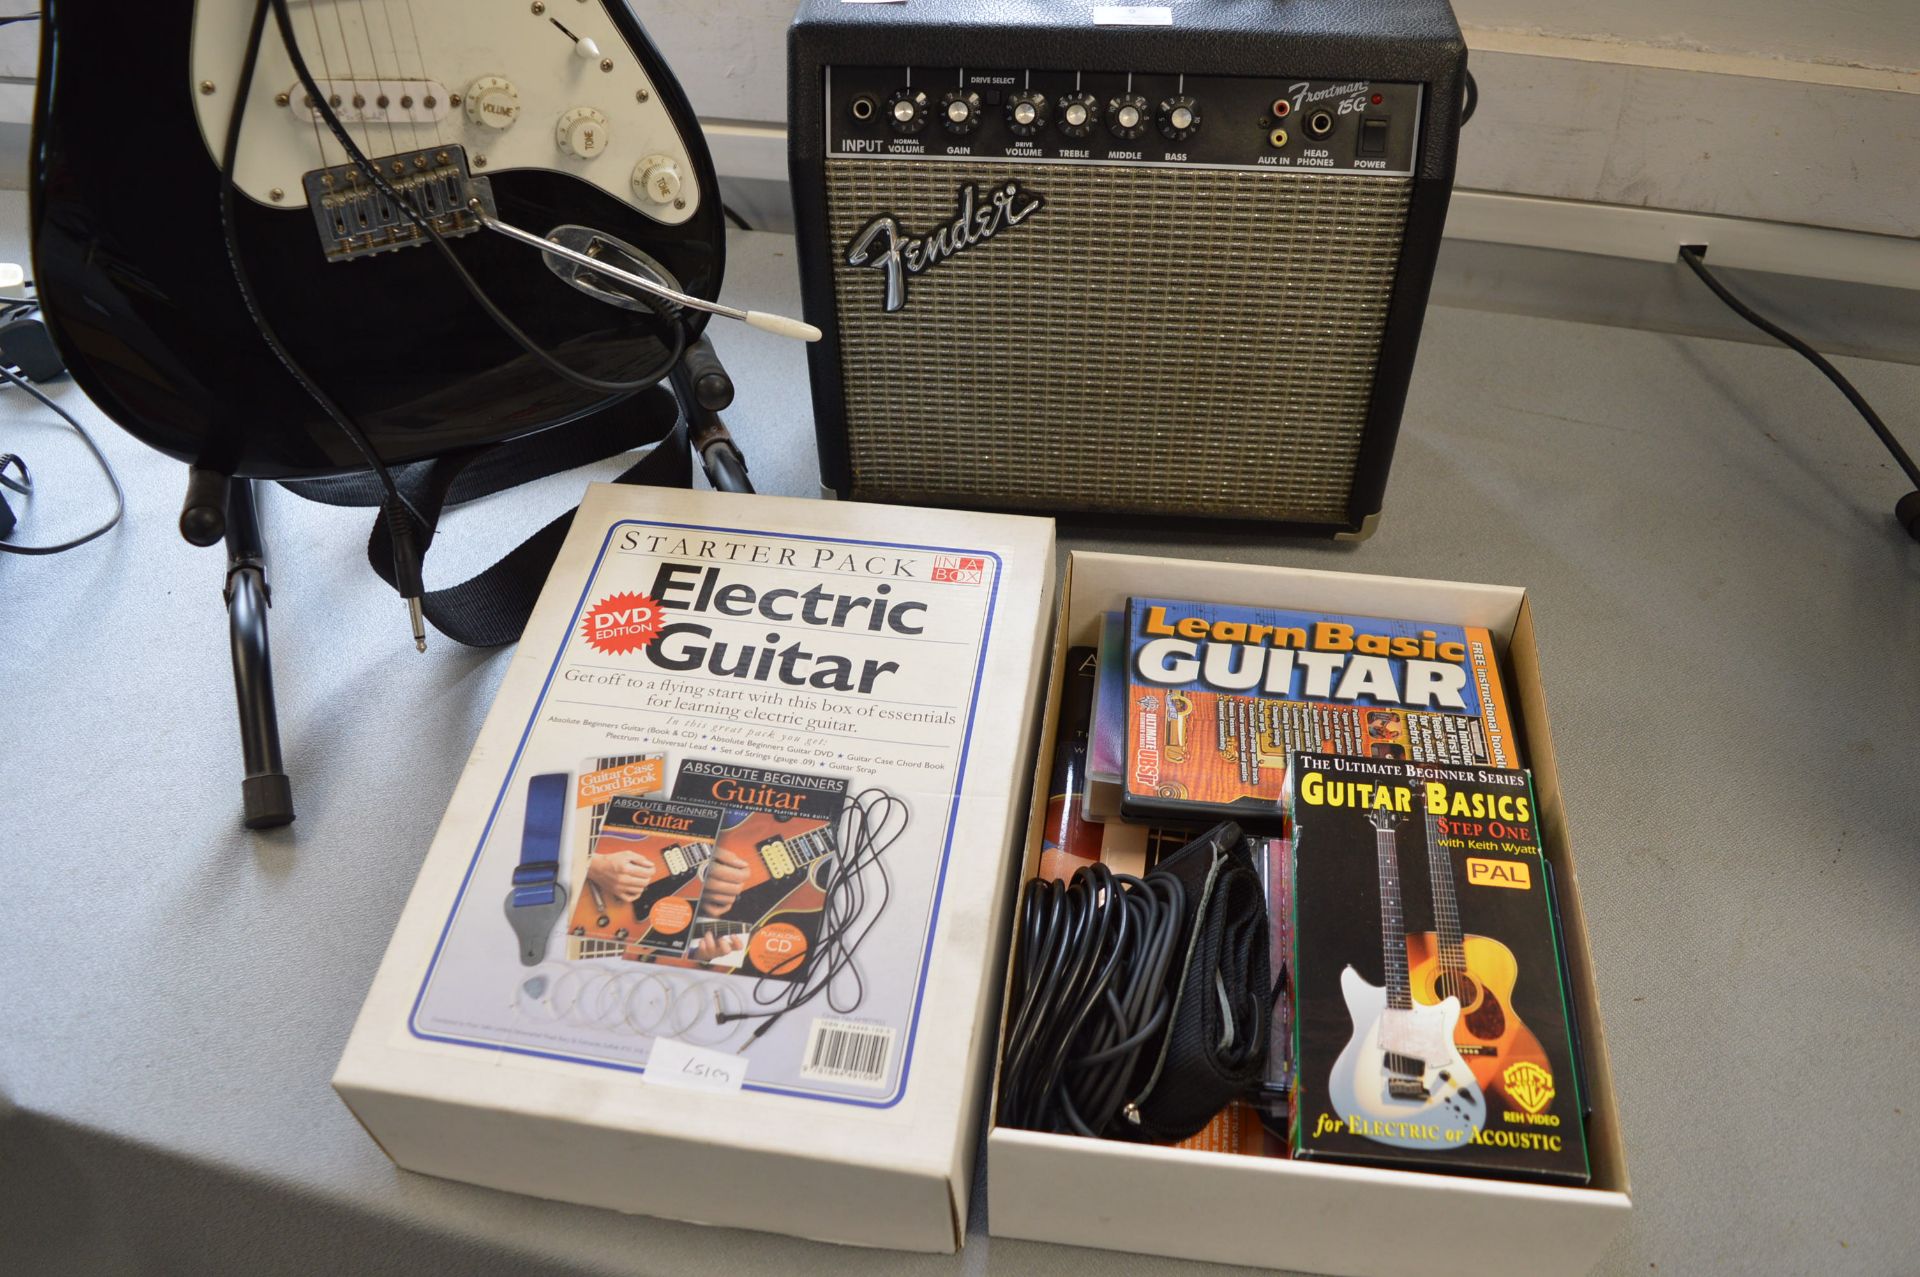 Fender Squier Stratocaster Electric Guitar with Frontman 15G Amplifier and Guitar Starter Pack - Image 2 of 3